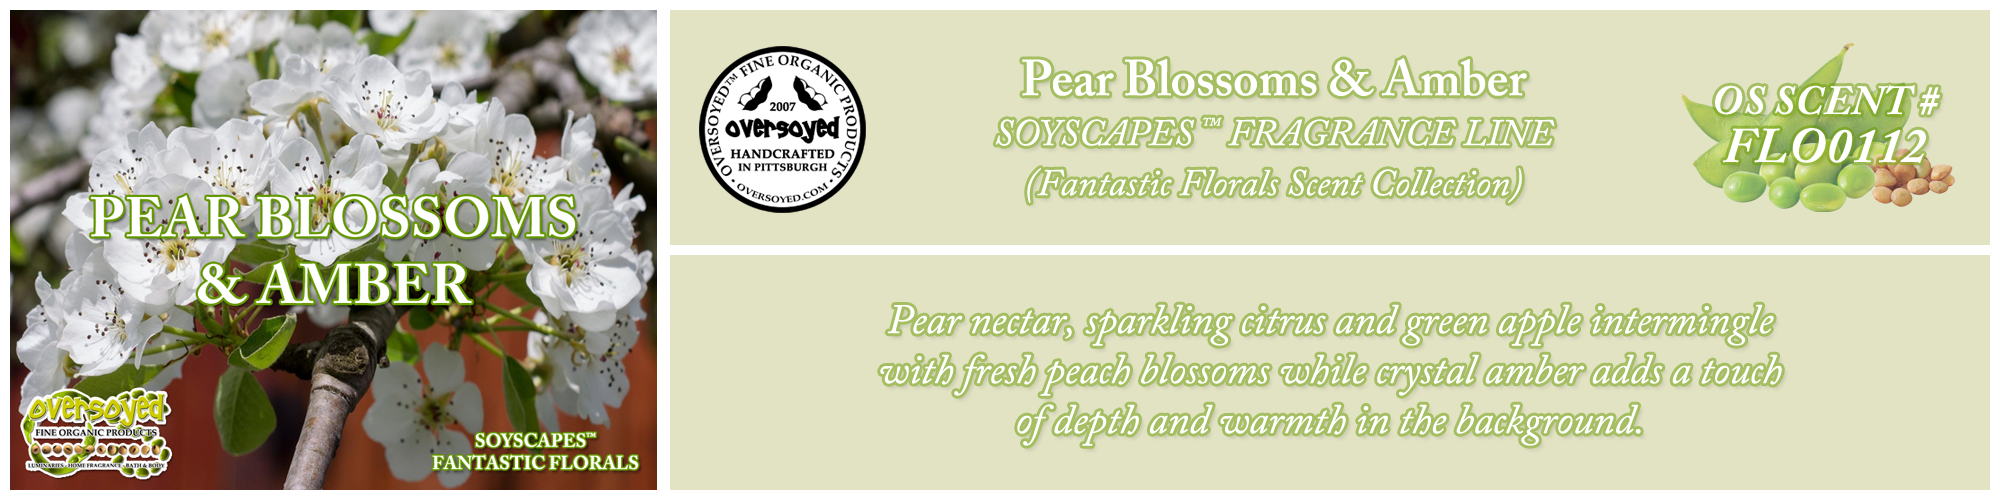 Pear Blossoms & Amber Handcrafted Products Collection